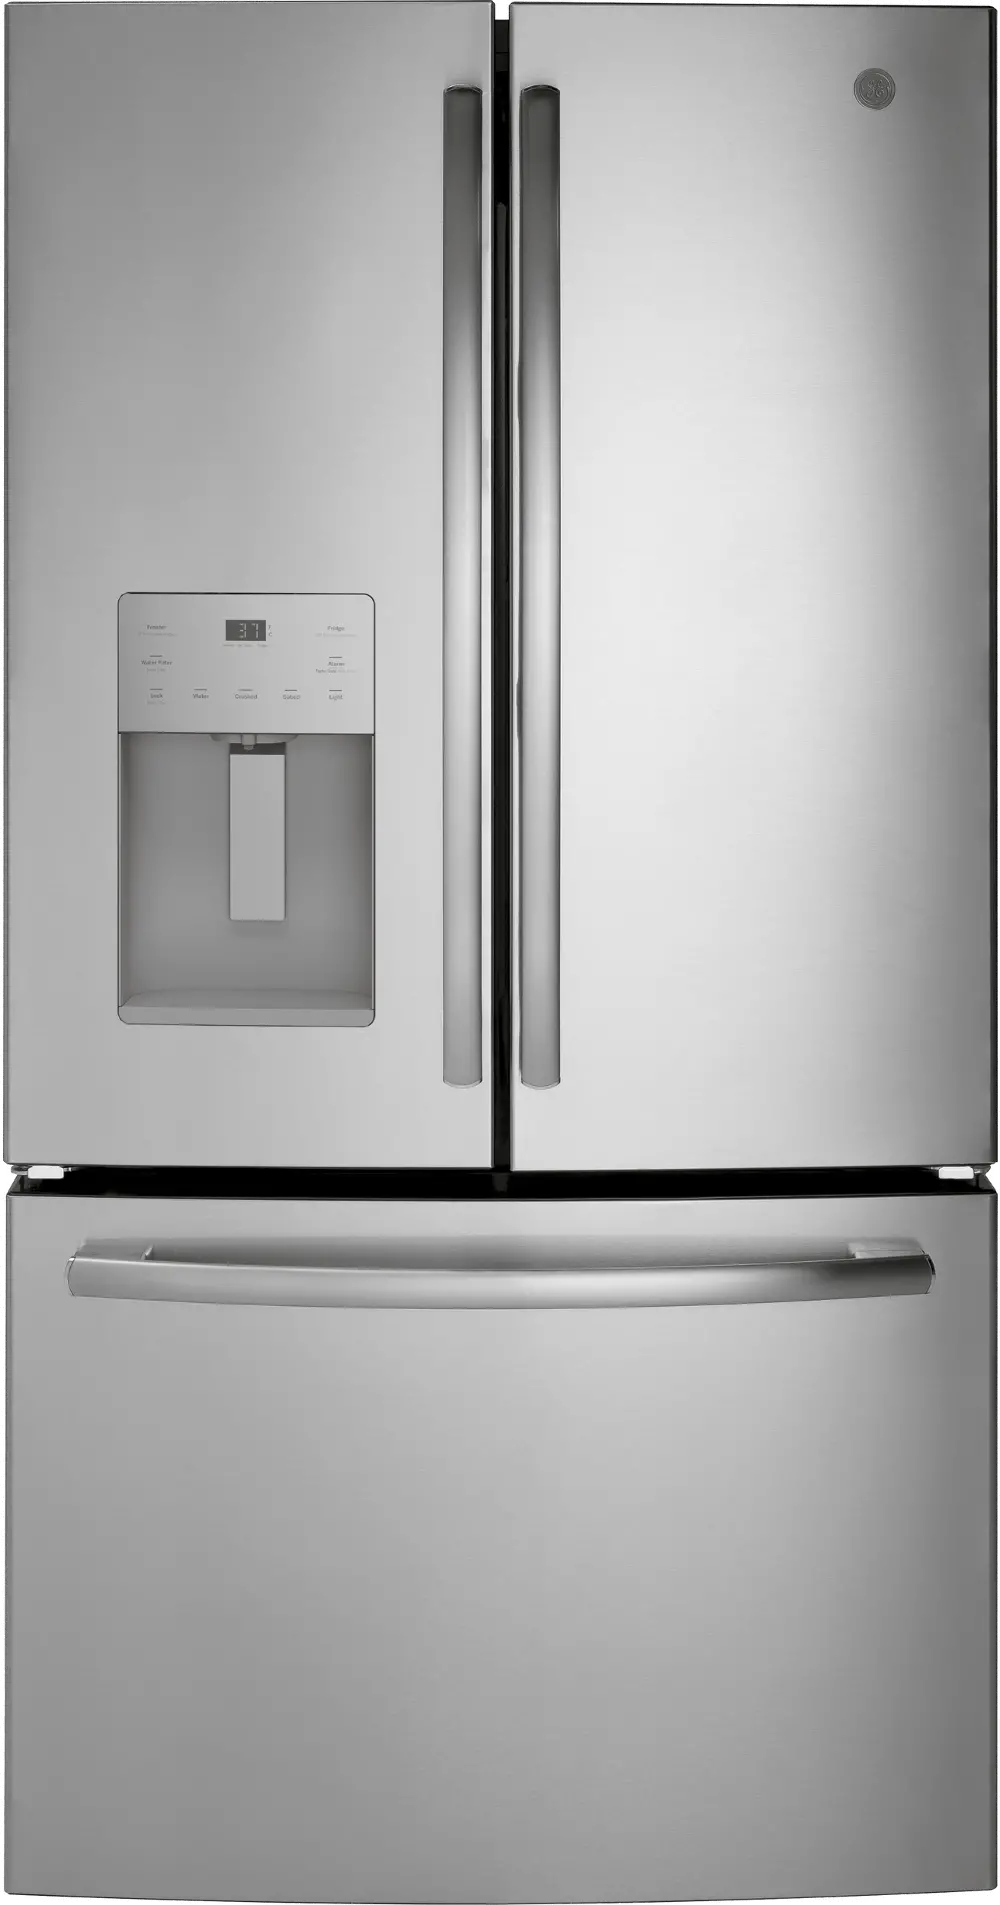 GFE26JSMSS GE 25.6 cu. ft French Door Refrigerator - 36 Inch Stainless Steel-1